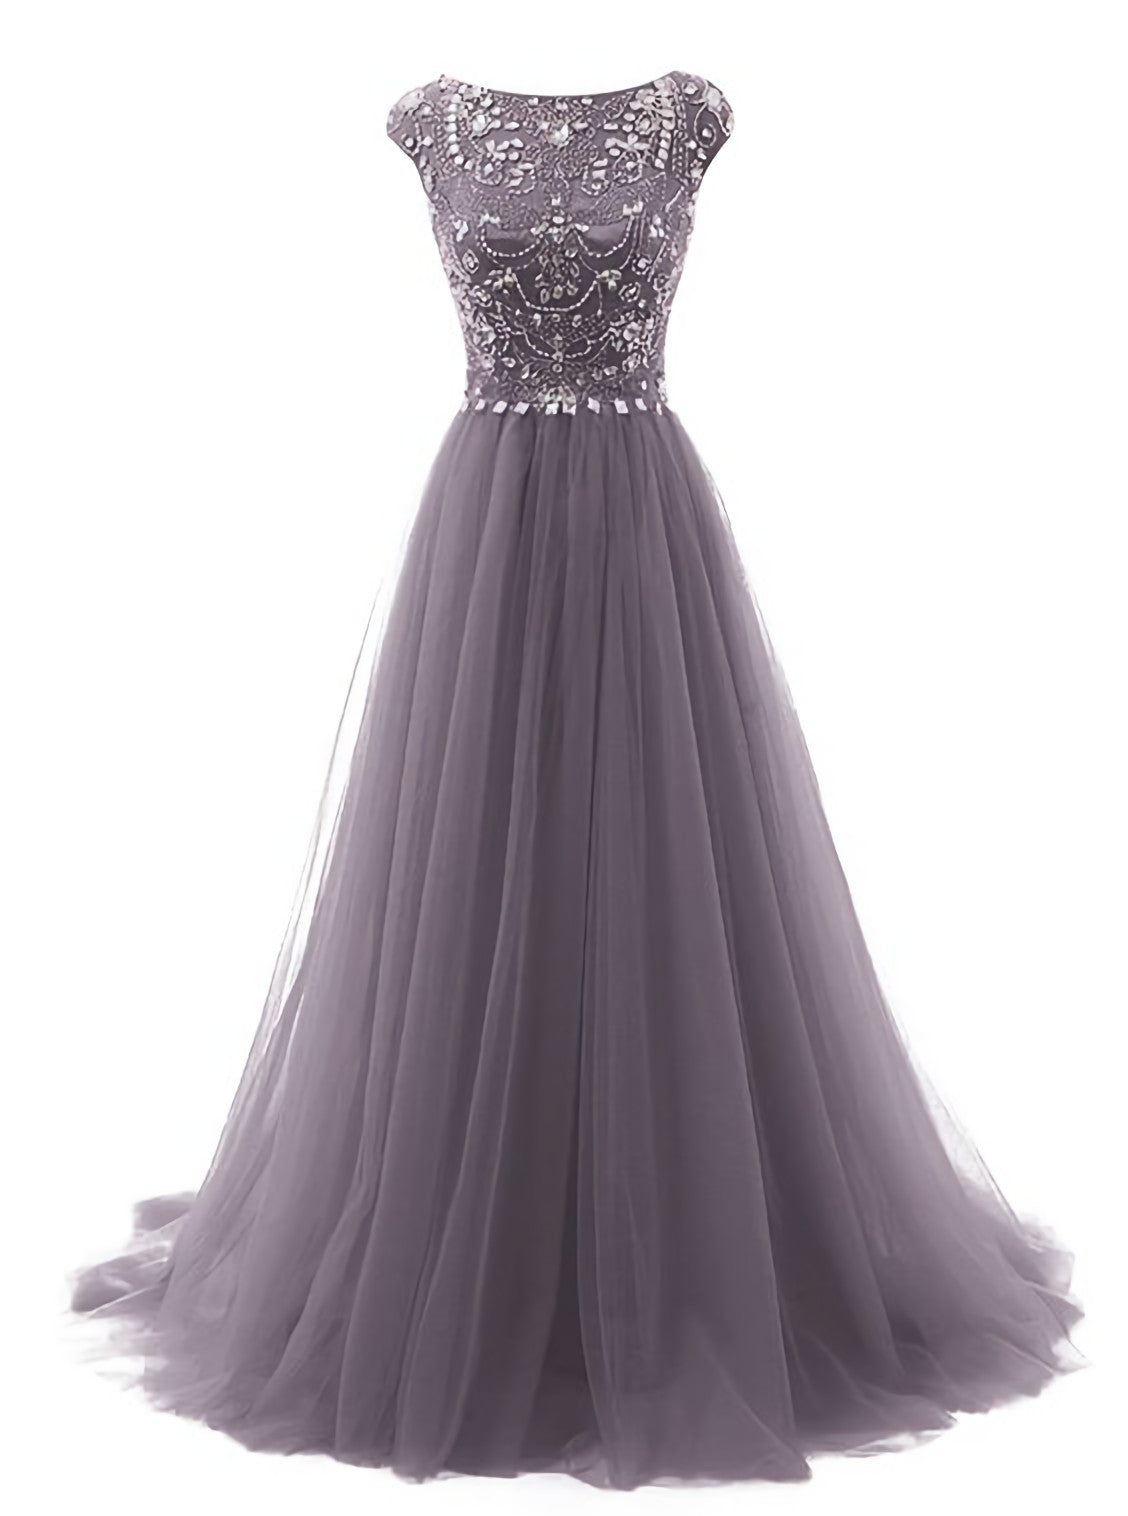 Bridesmaid Dresses Blues, Grey Beading With Flower Type Modest Long Floor Length For Teens Prom Dresses